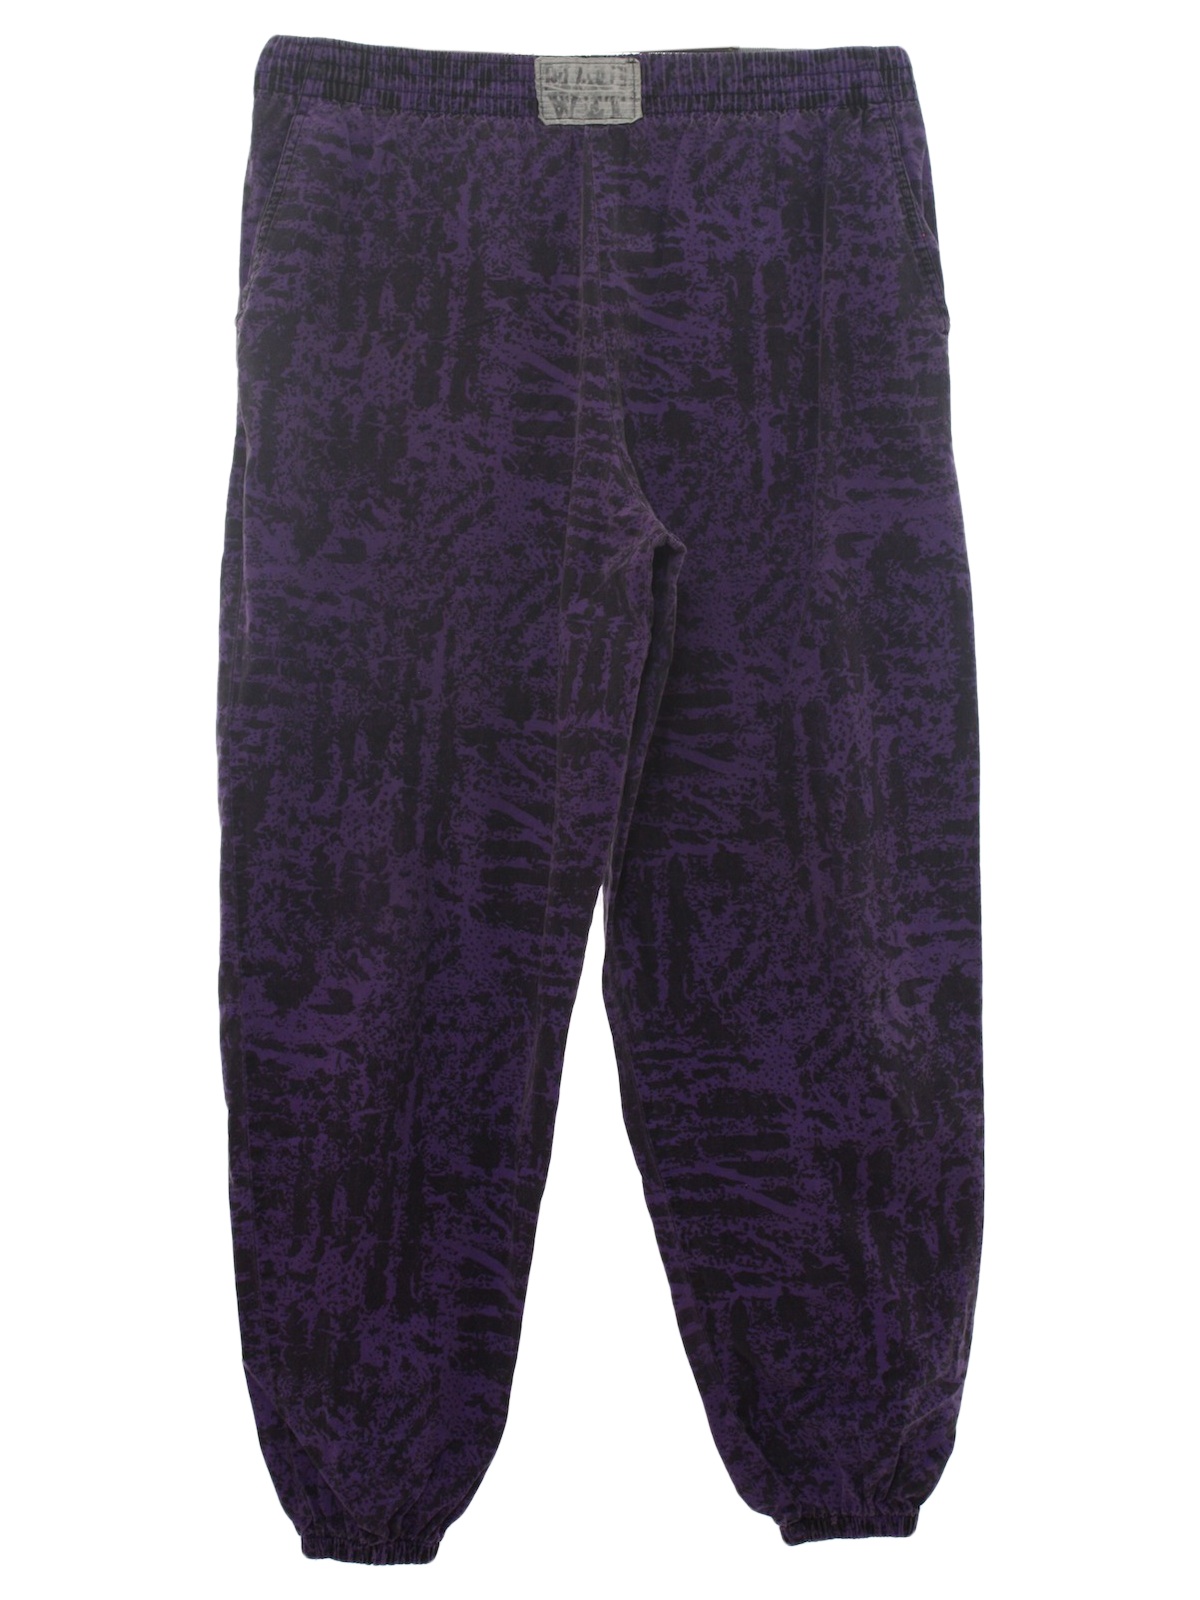 Eighties Maui wet Pants: 80s -Maui wet- Mens purple and grey abstract ...